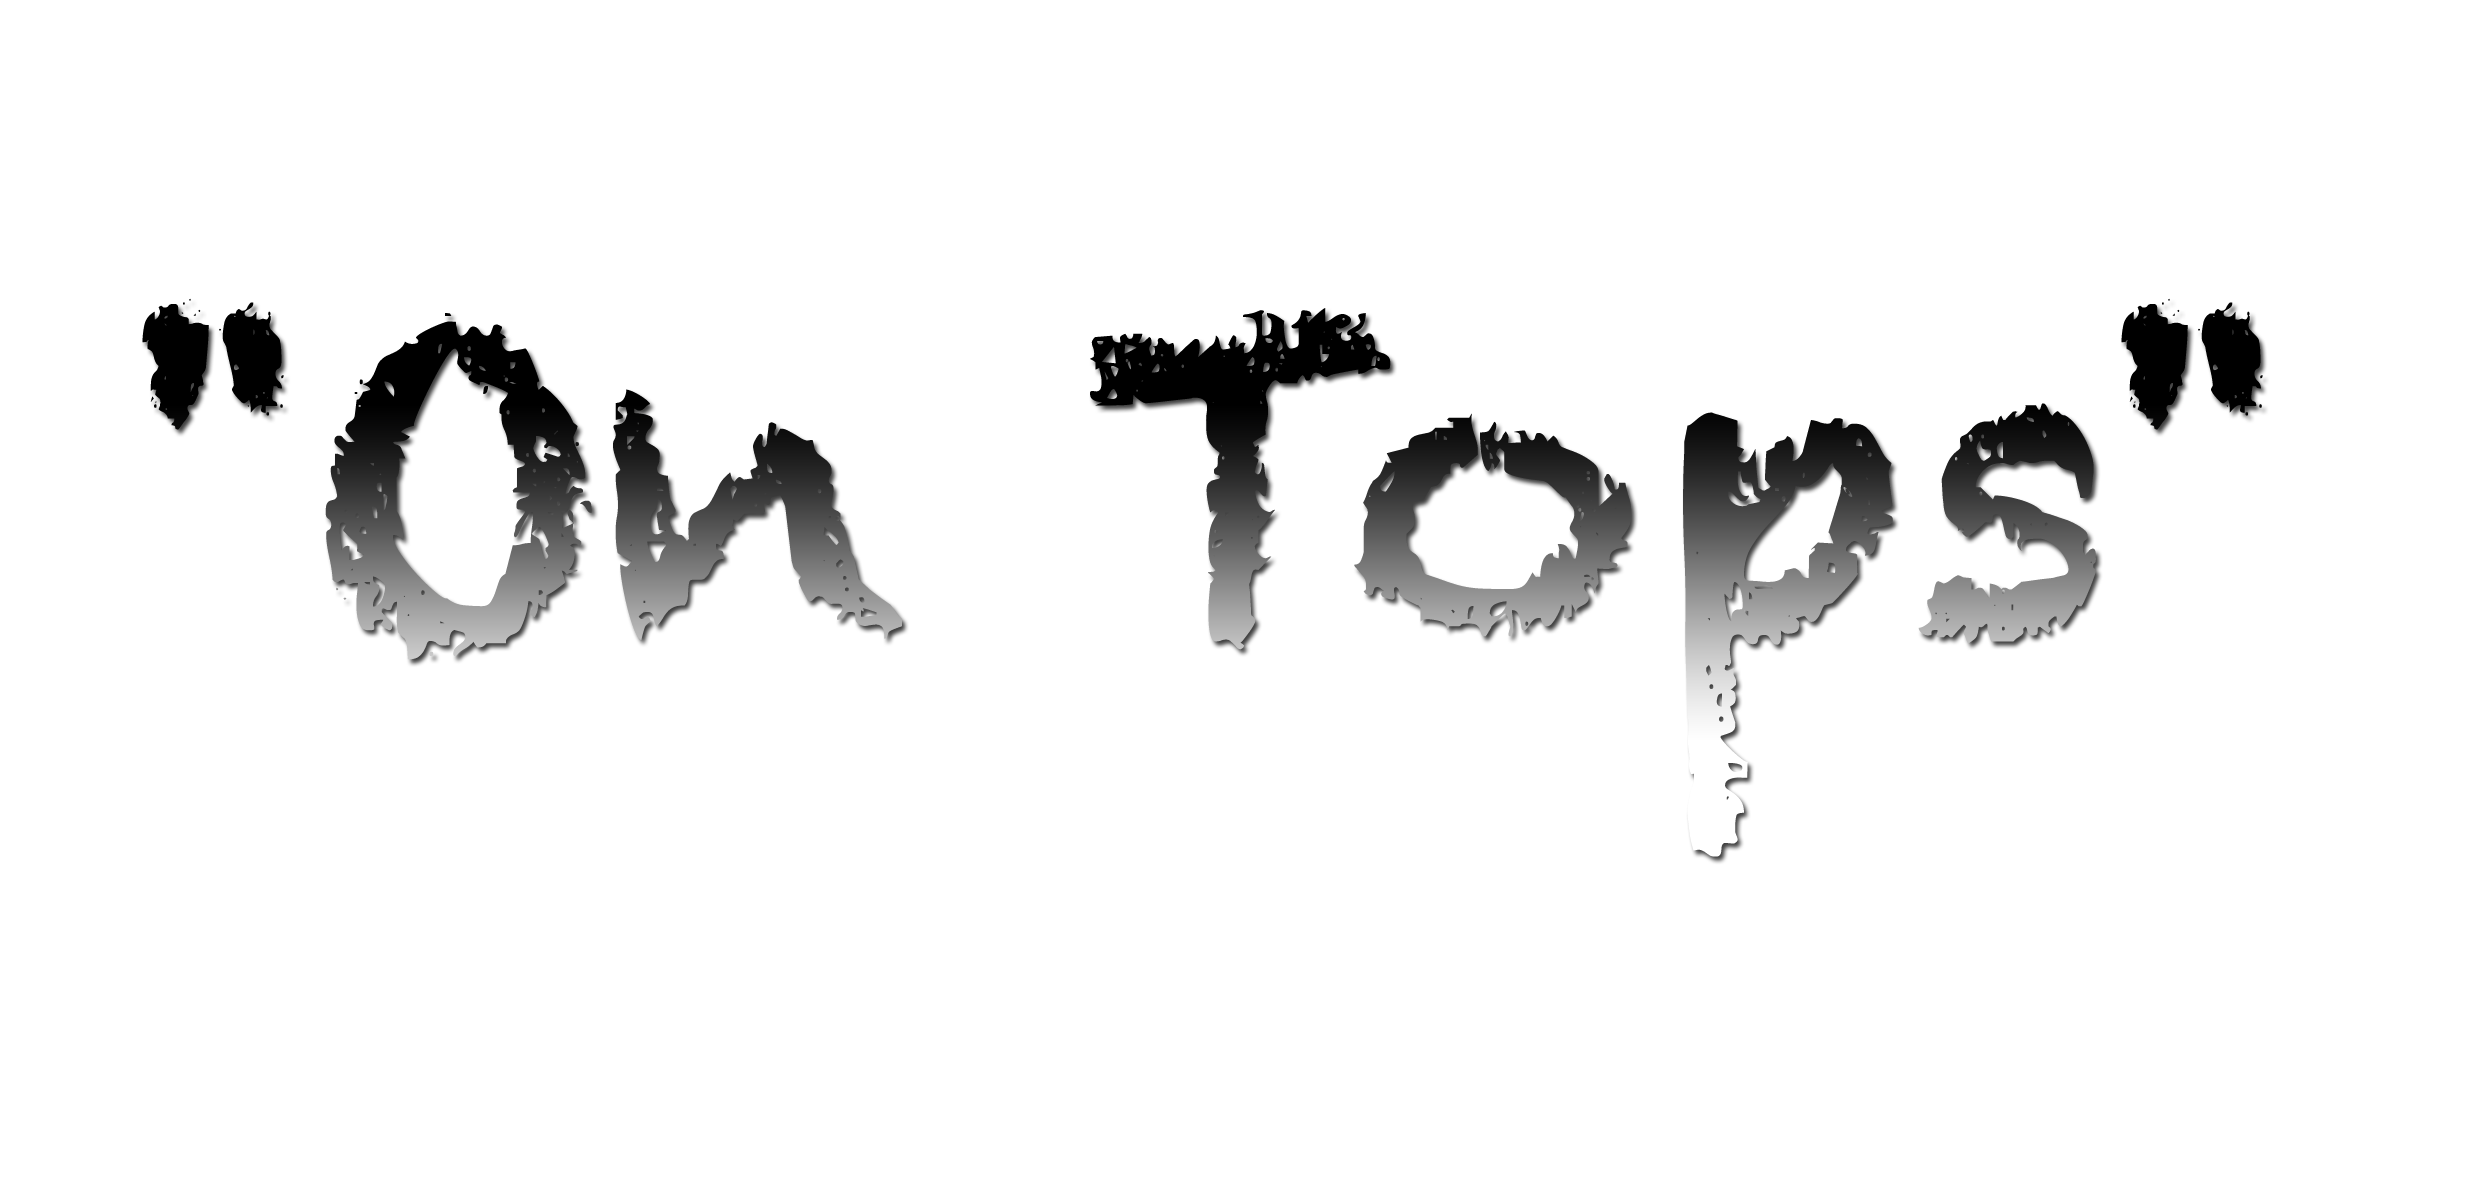 “On Tops” – 03/03/12